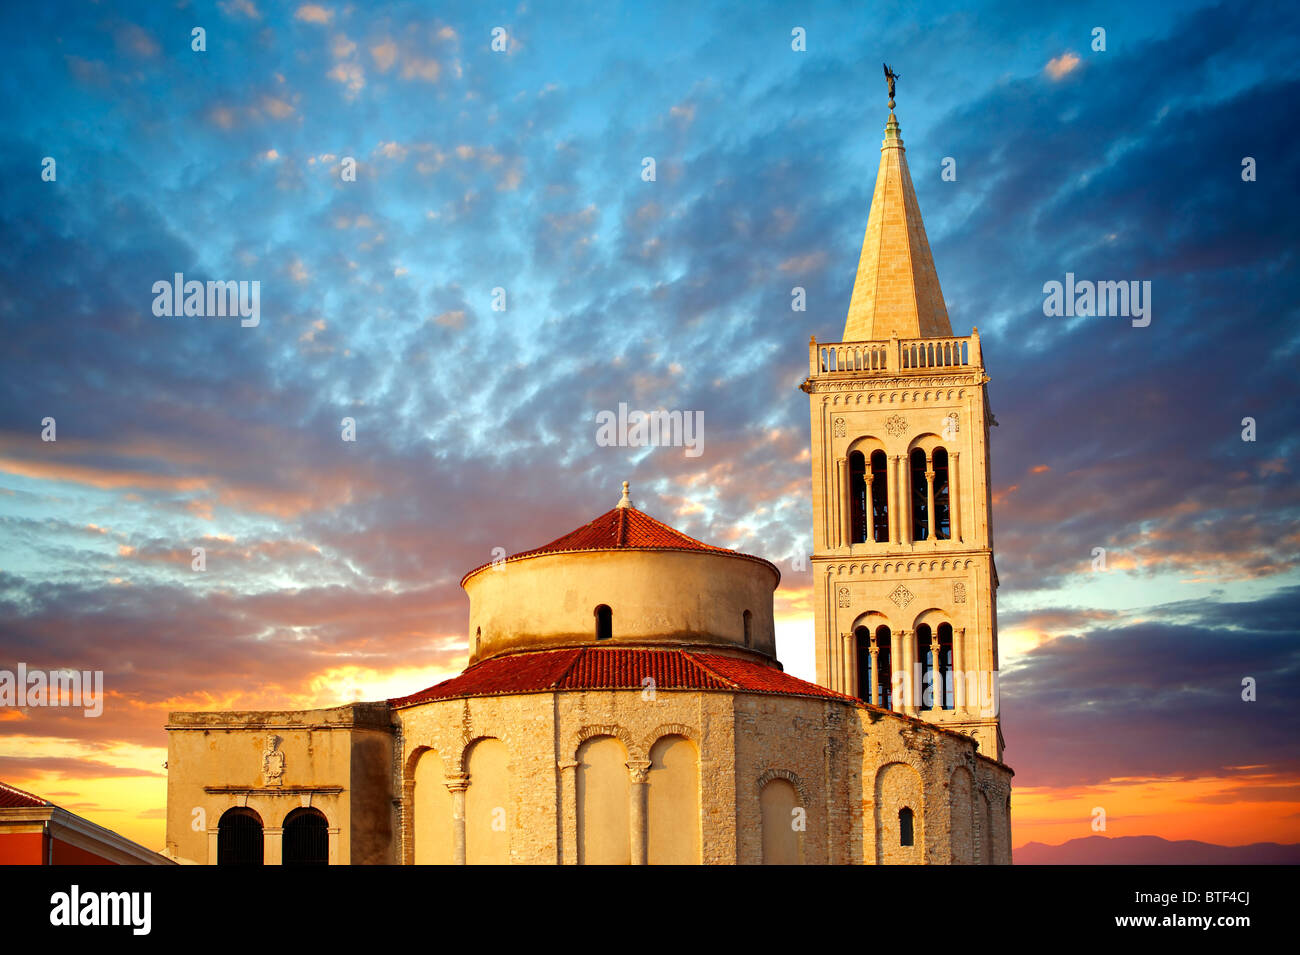 The Byzantine St Donat's Church & the Campinale bell tower of the St Anastasia Cathedral. Zadar, Croatia Stock Photo